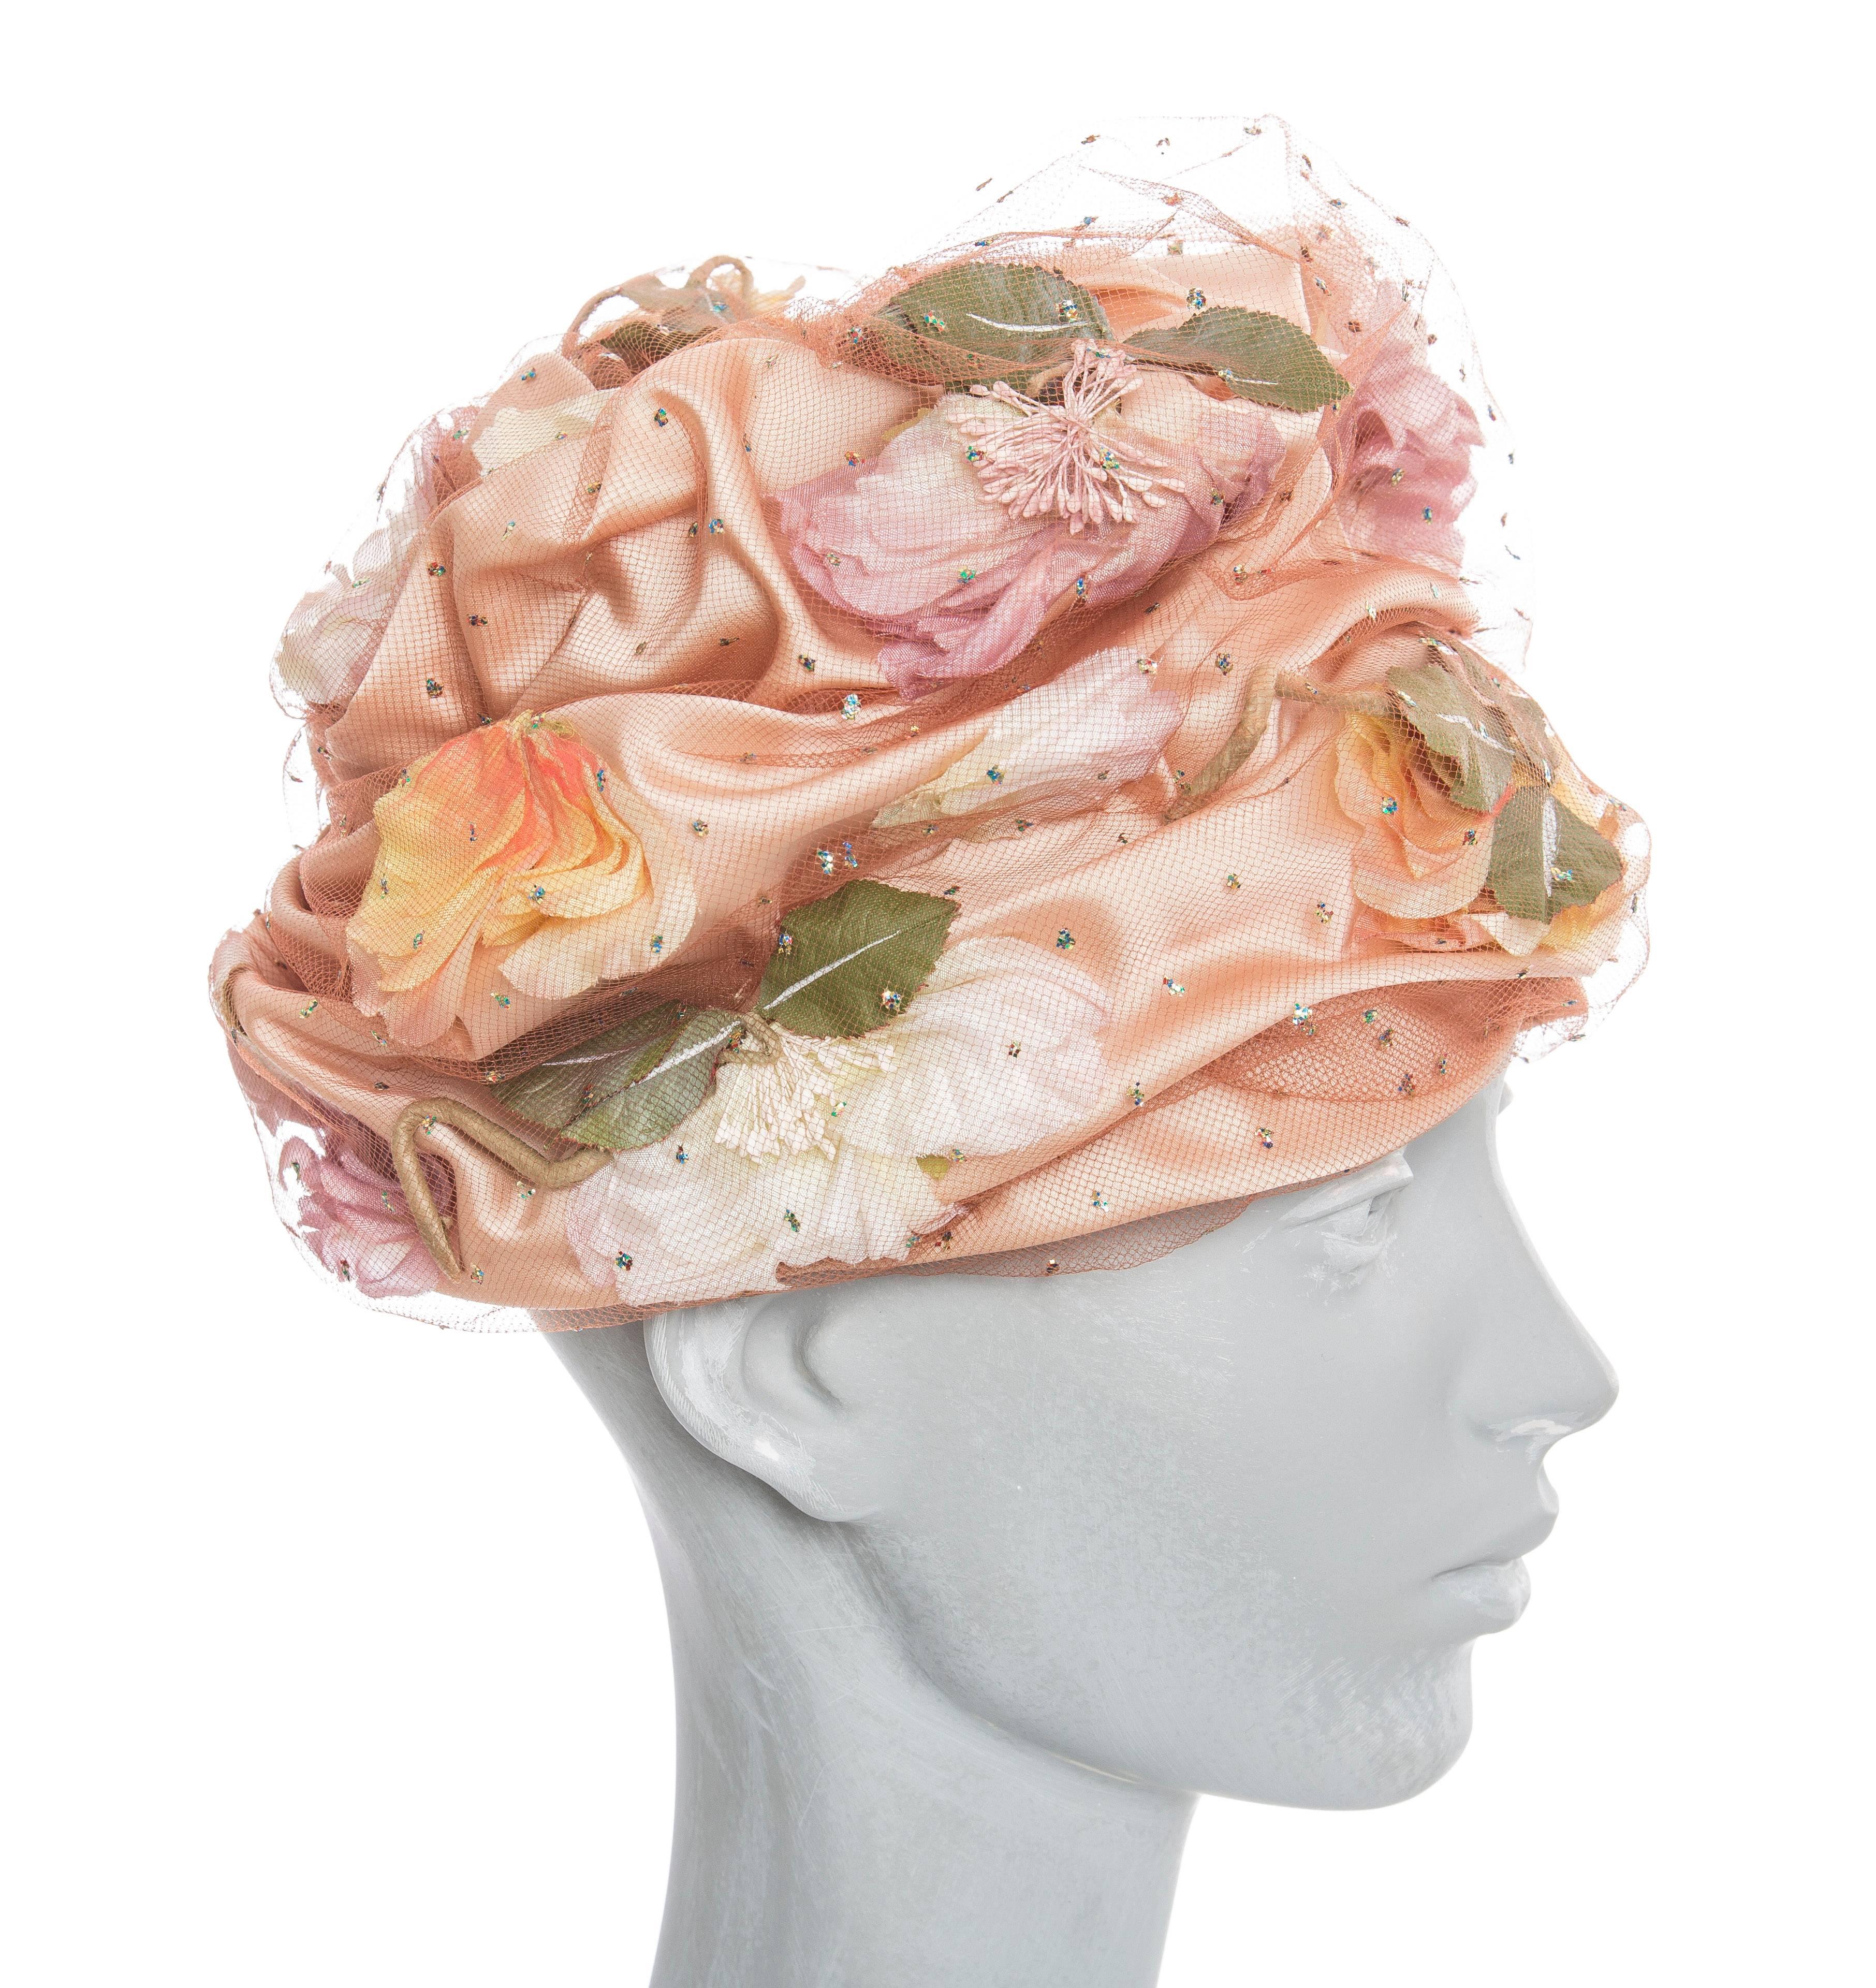 Christian Dior Chapeaux peach hat with flowers covered with netting.<br />
<br />
circumference 24 inch